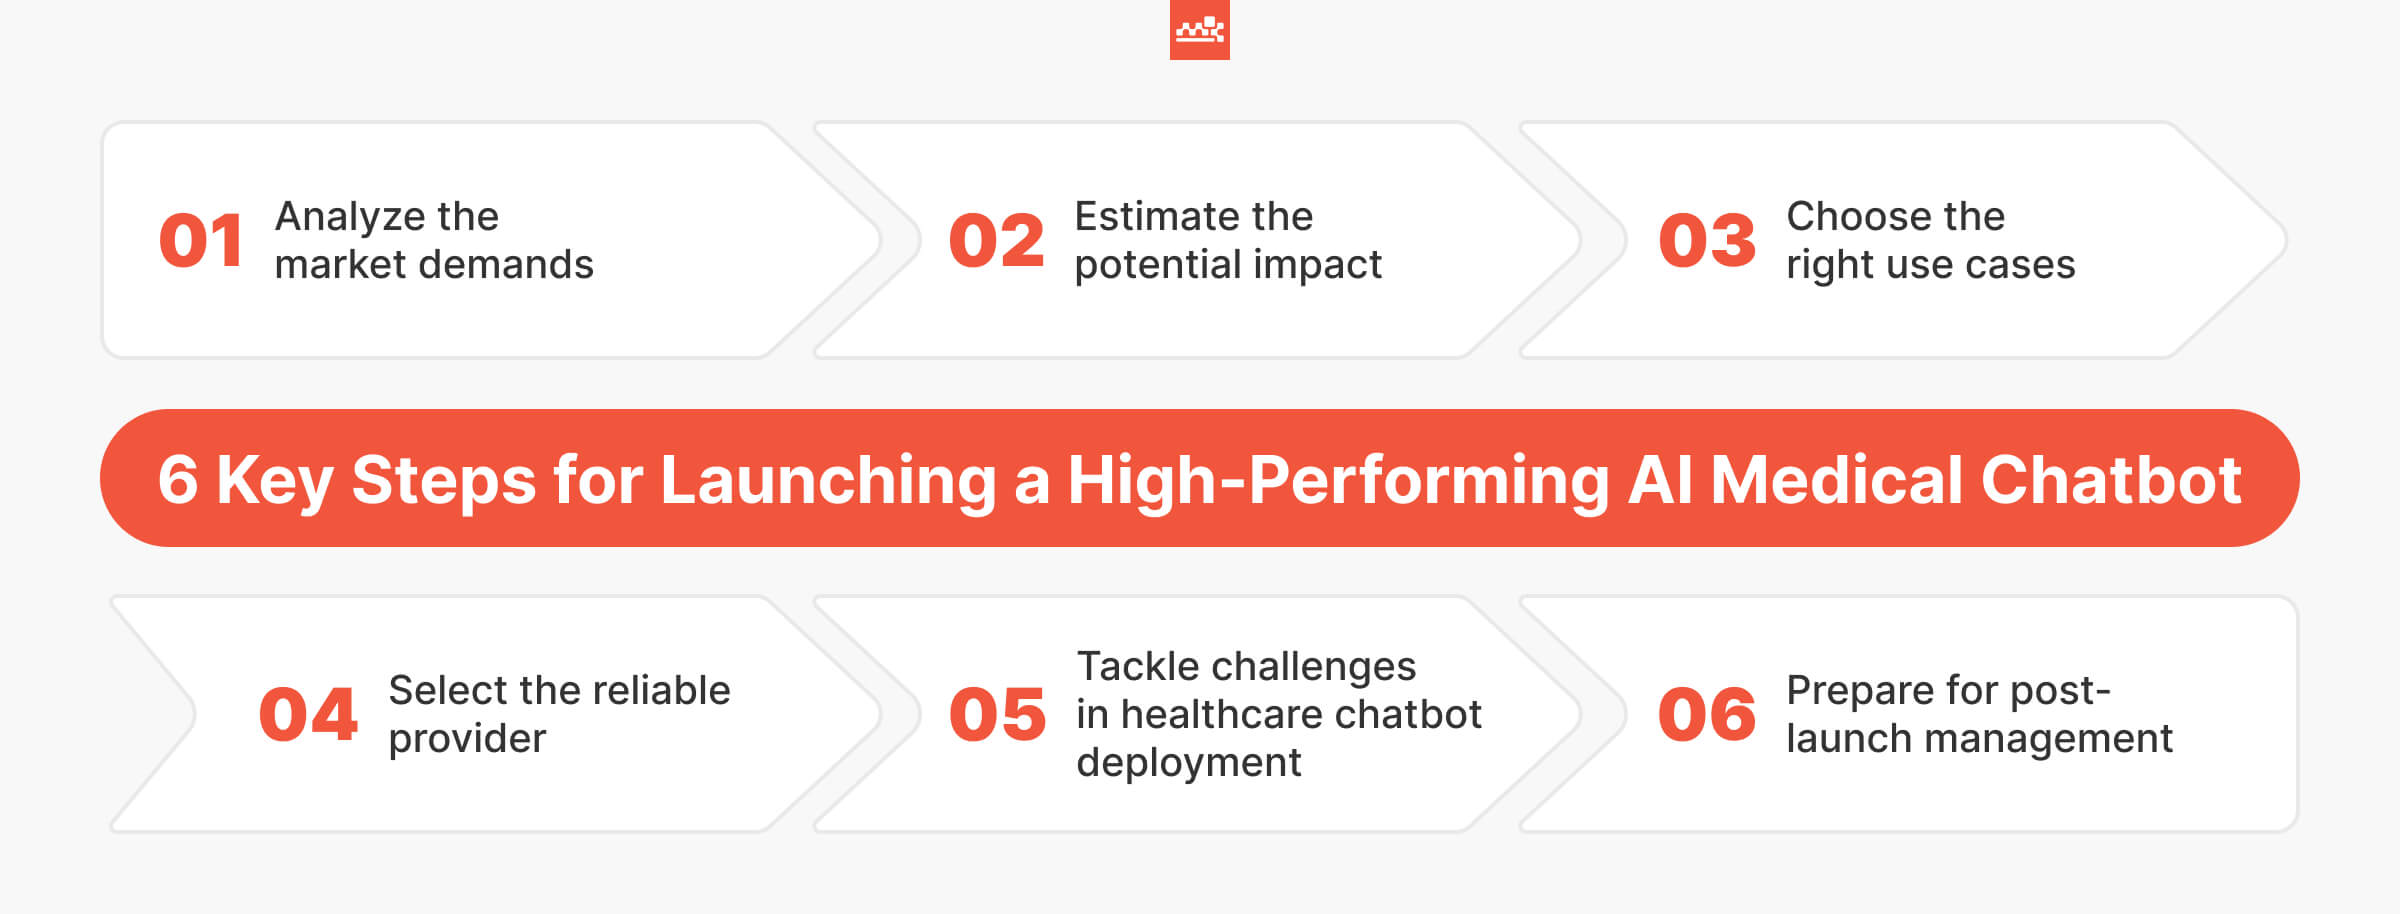 6 Key Steps for Launching a High-Performing AI Medical Chatbot